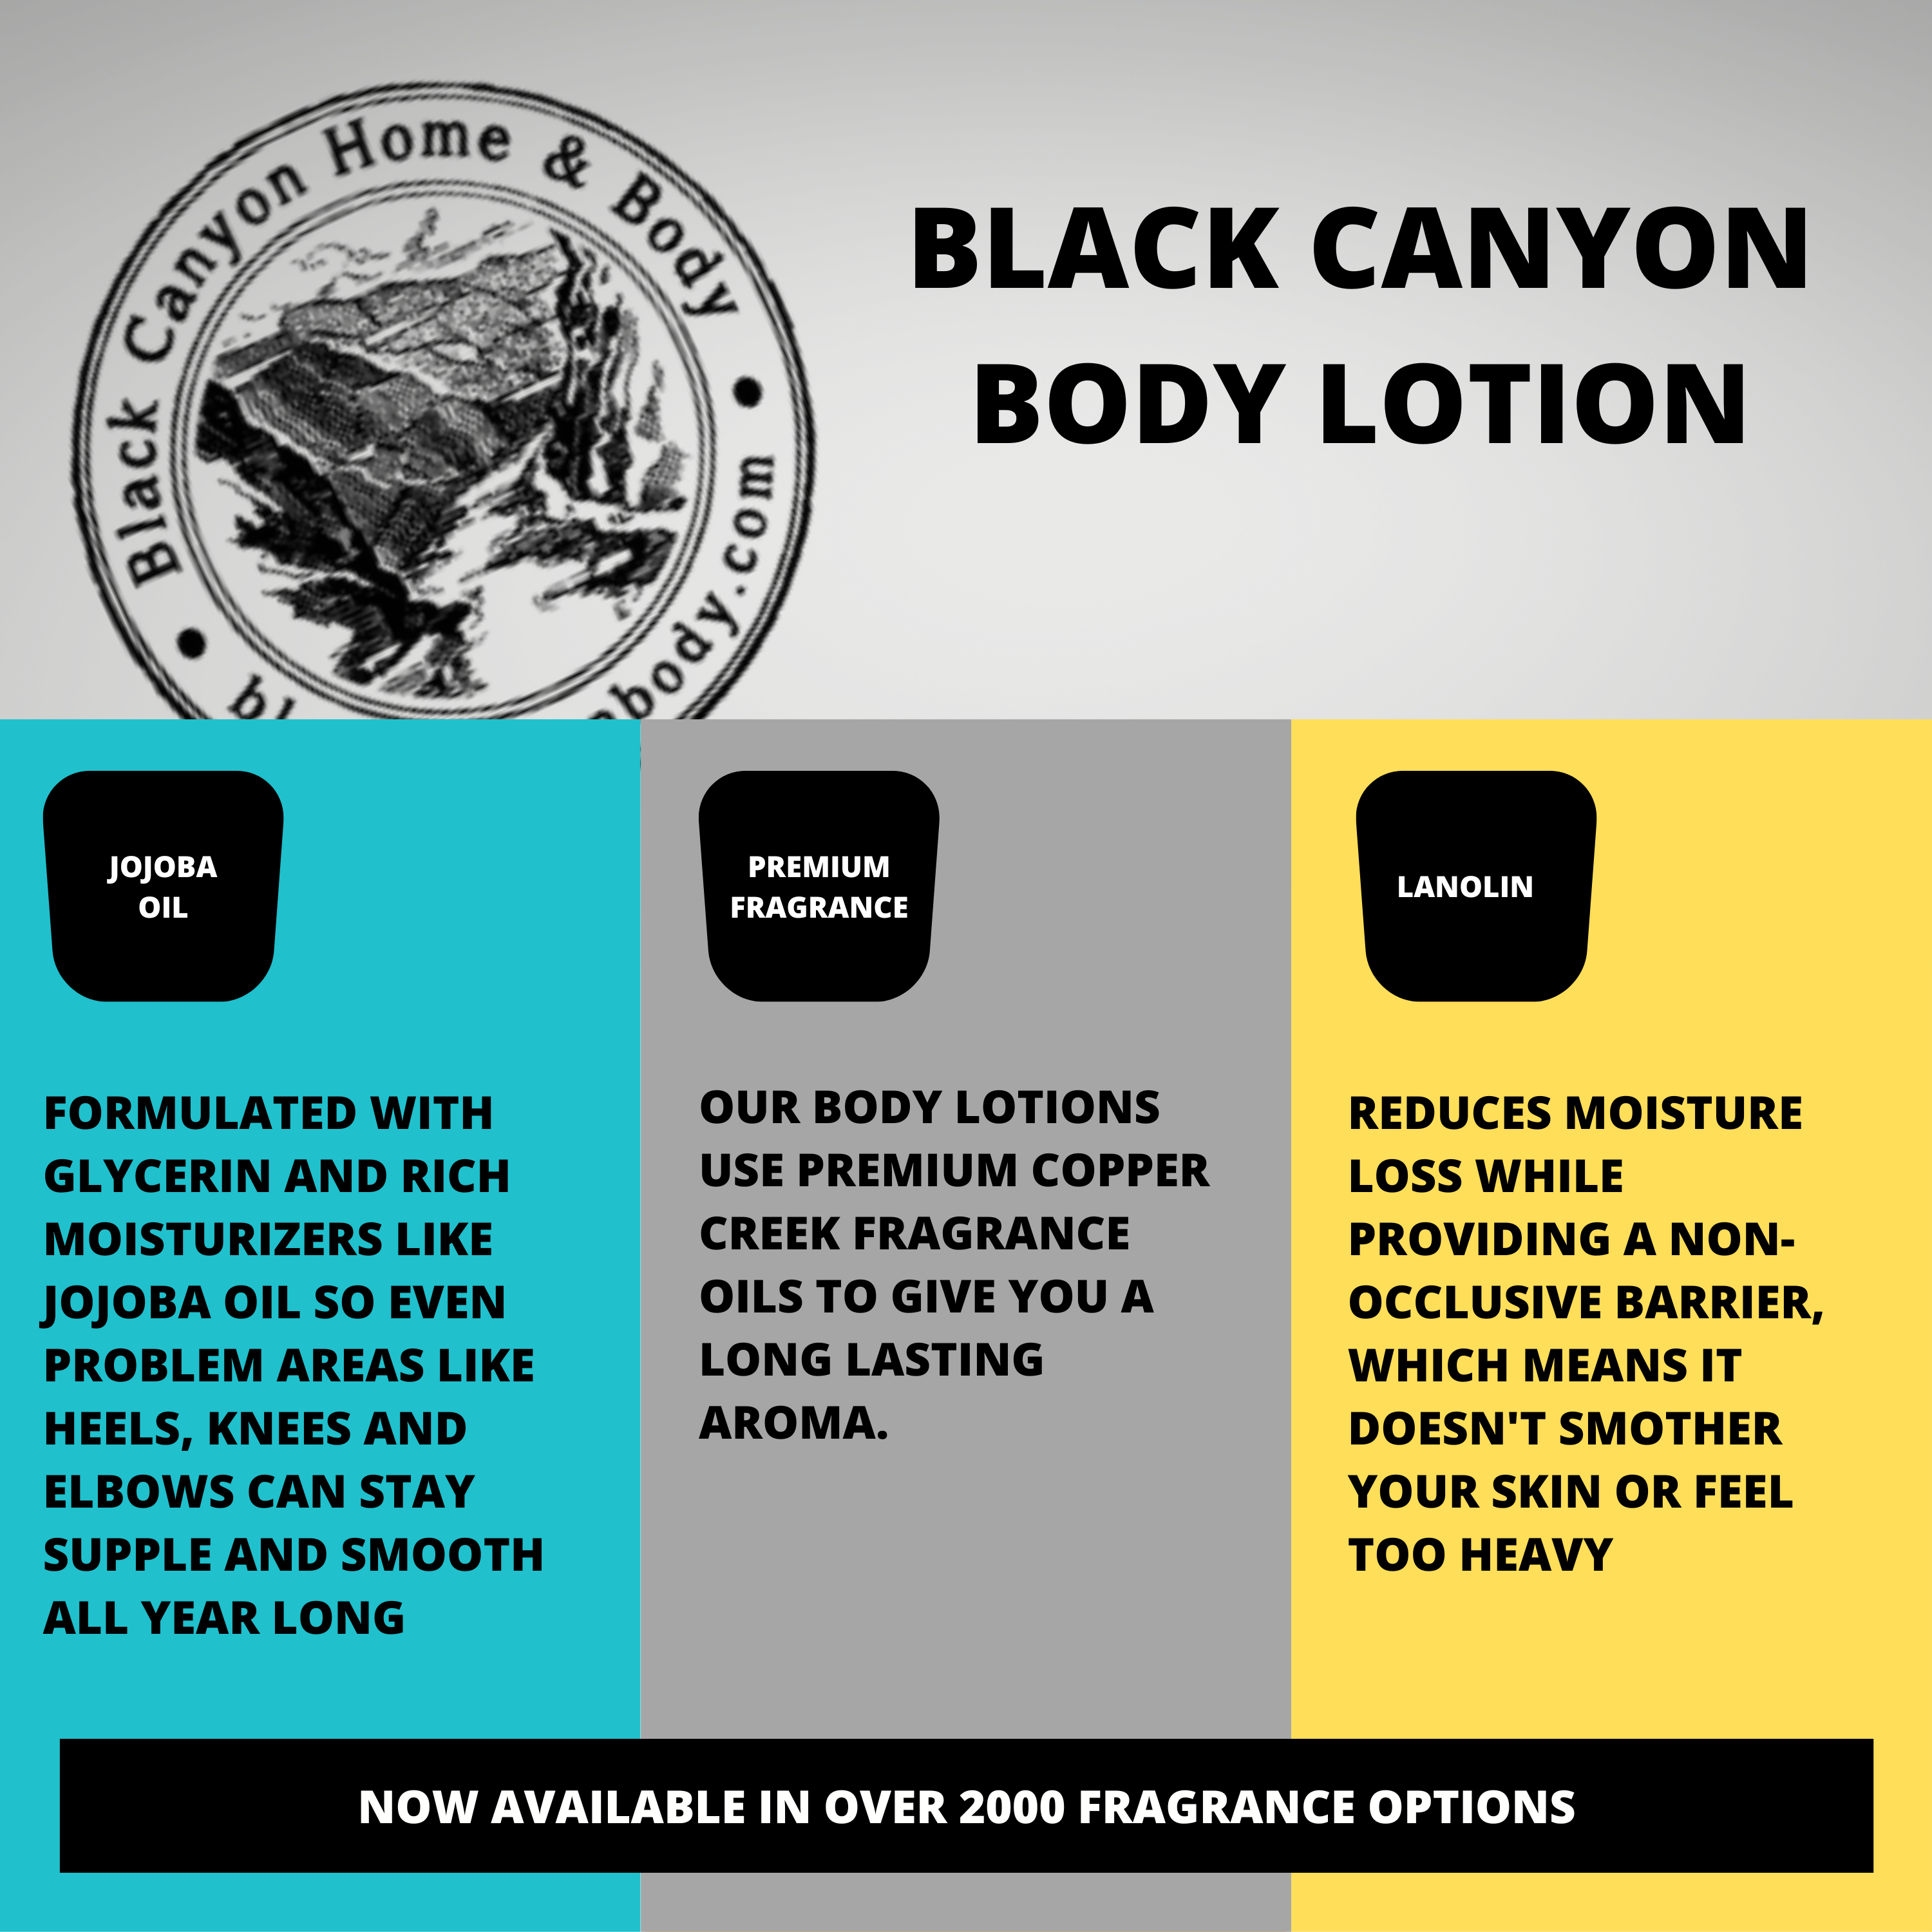 Black Canyon Berry Musk Scented Luxury Body Lotion with Lanolin and Jojoba Oil